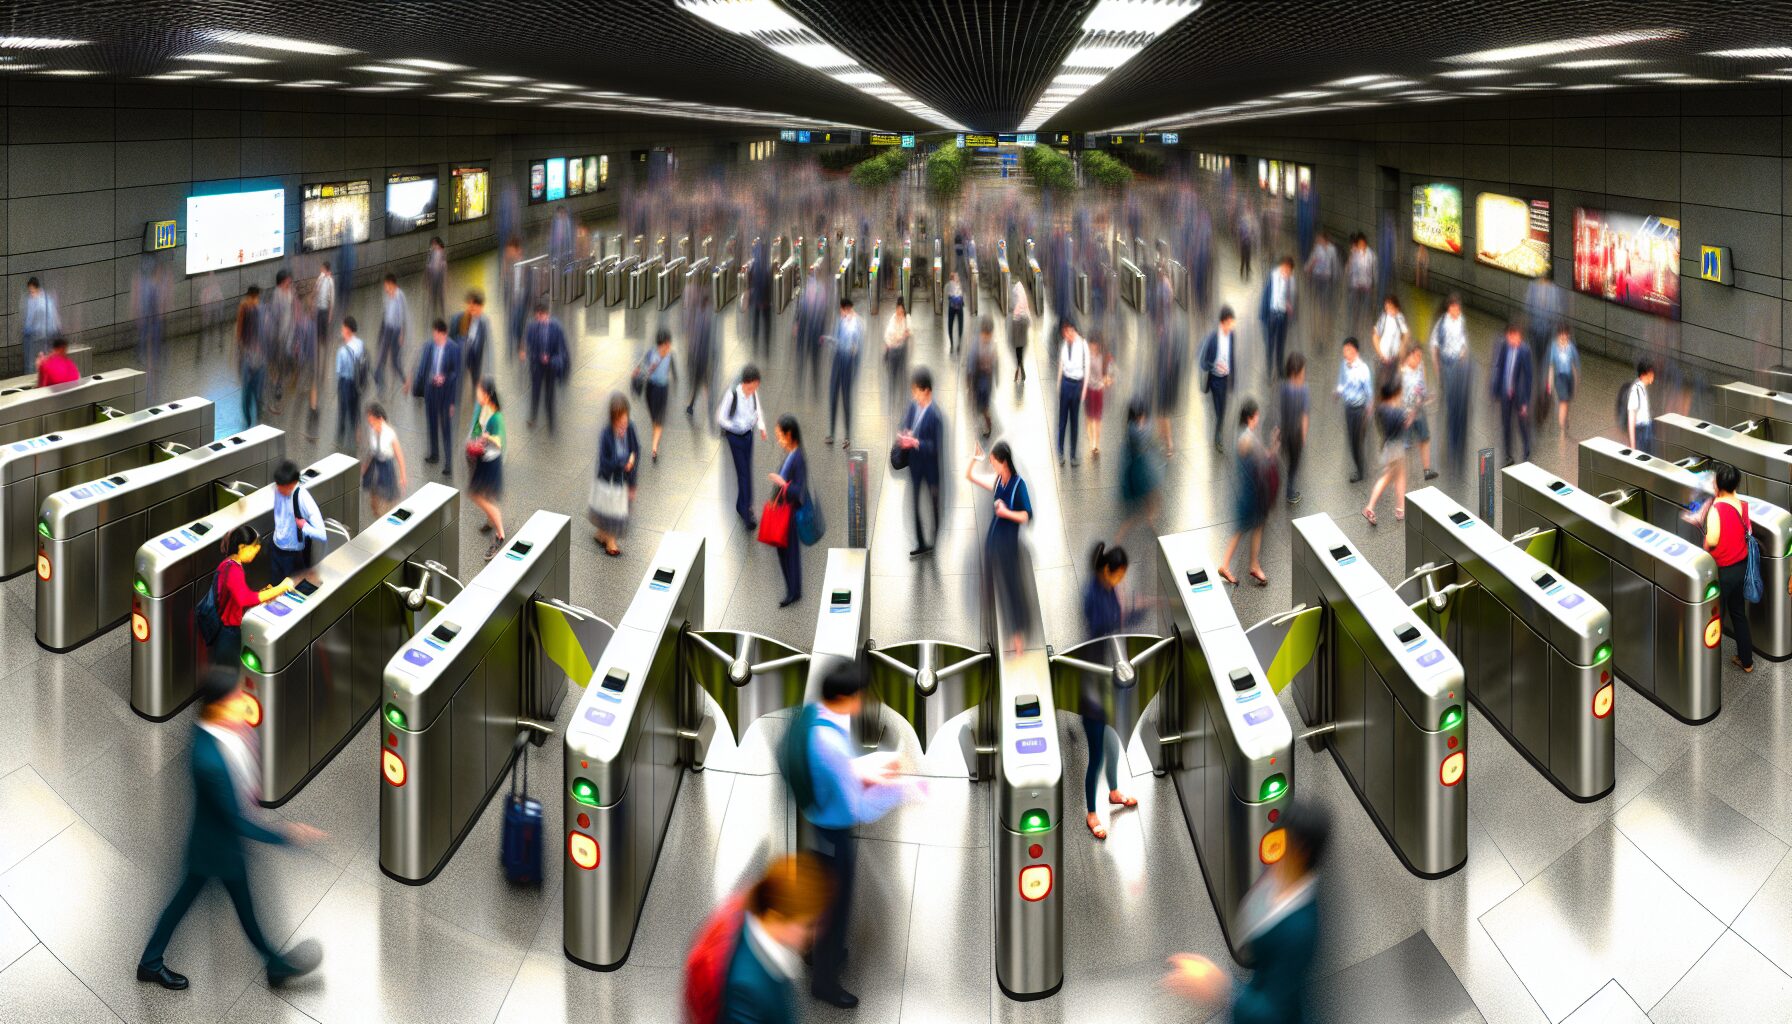 Various turnstile barrier gates in a crowded subway station